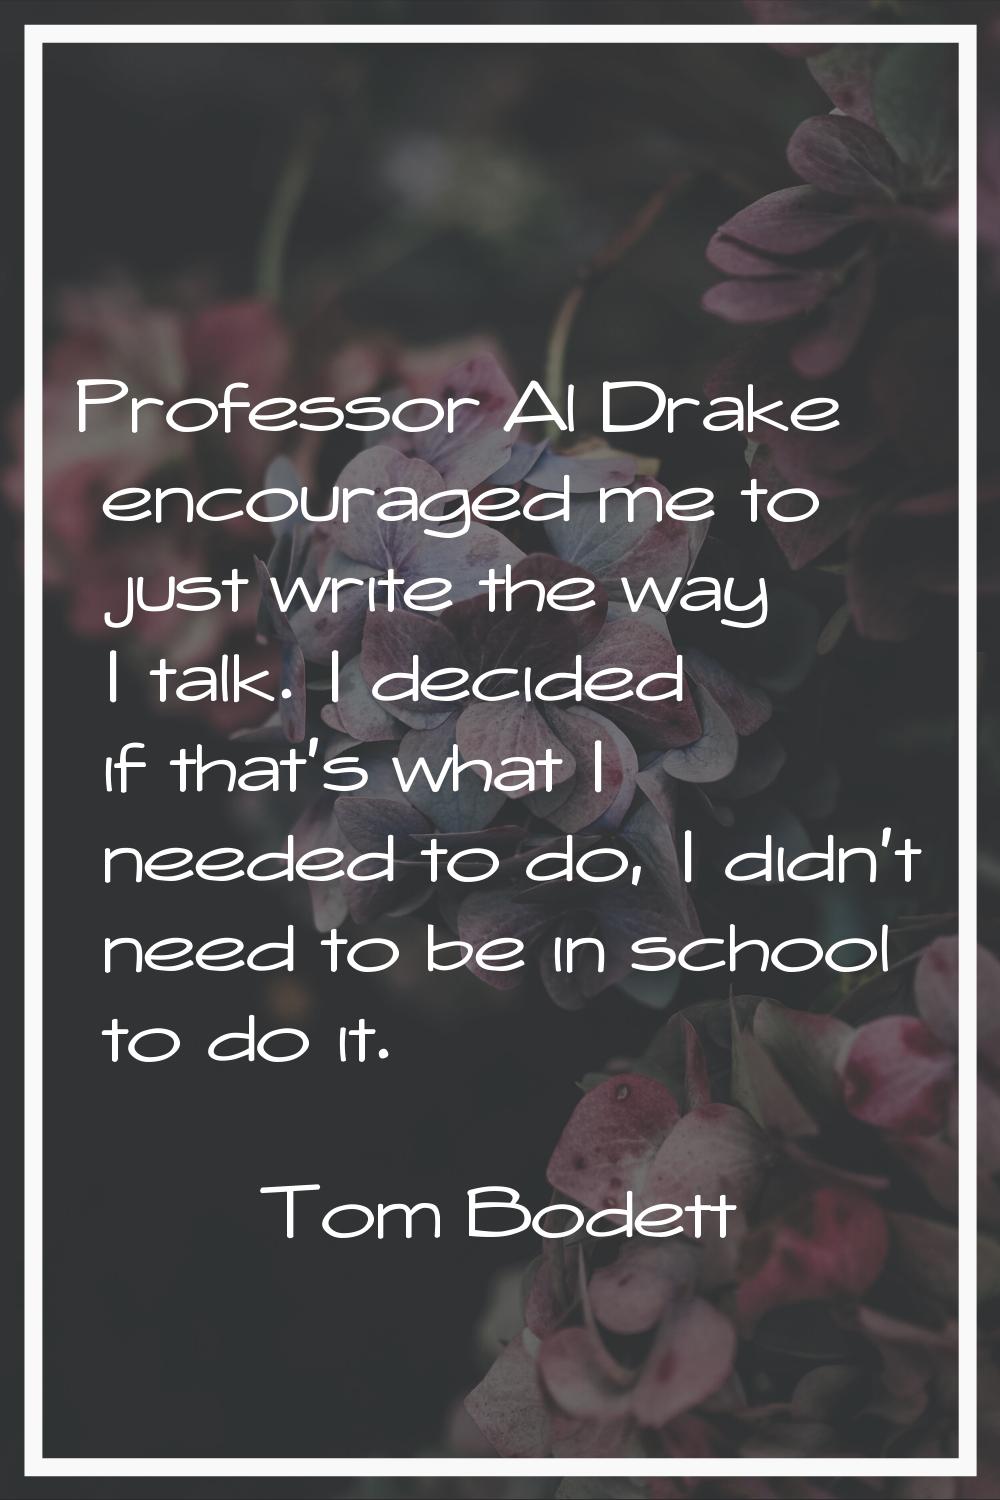 Professor Al Drake encouraged me to just write the way I talk. I decided if that's what I needed to